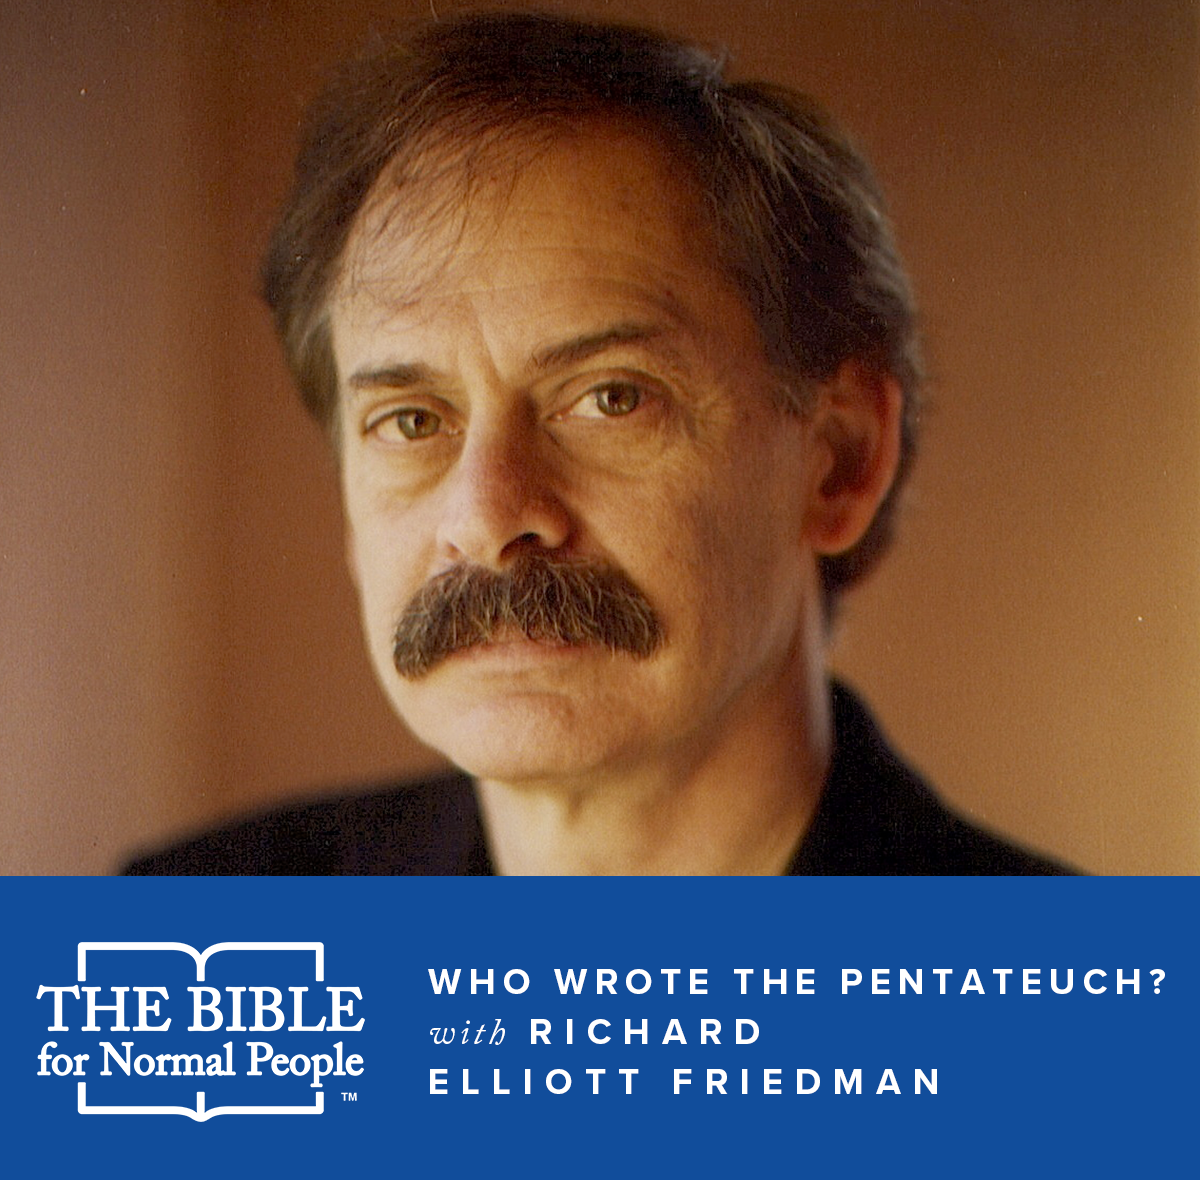 Interview with Richard Elliott Friedman: Who Wrote the Pentateuch?